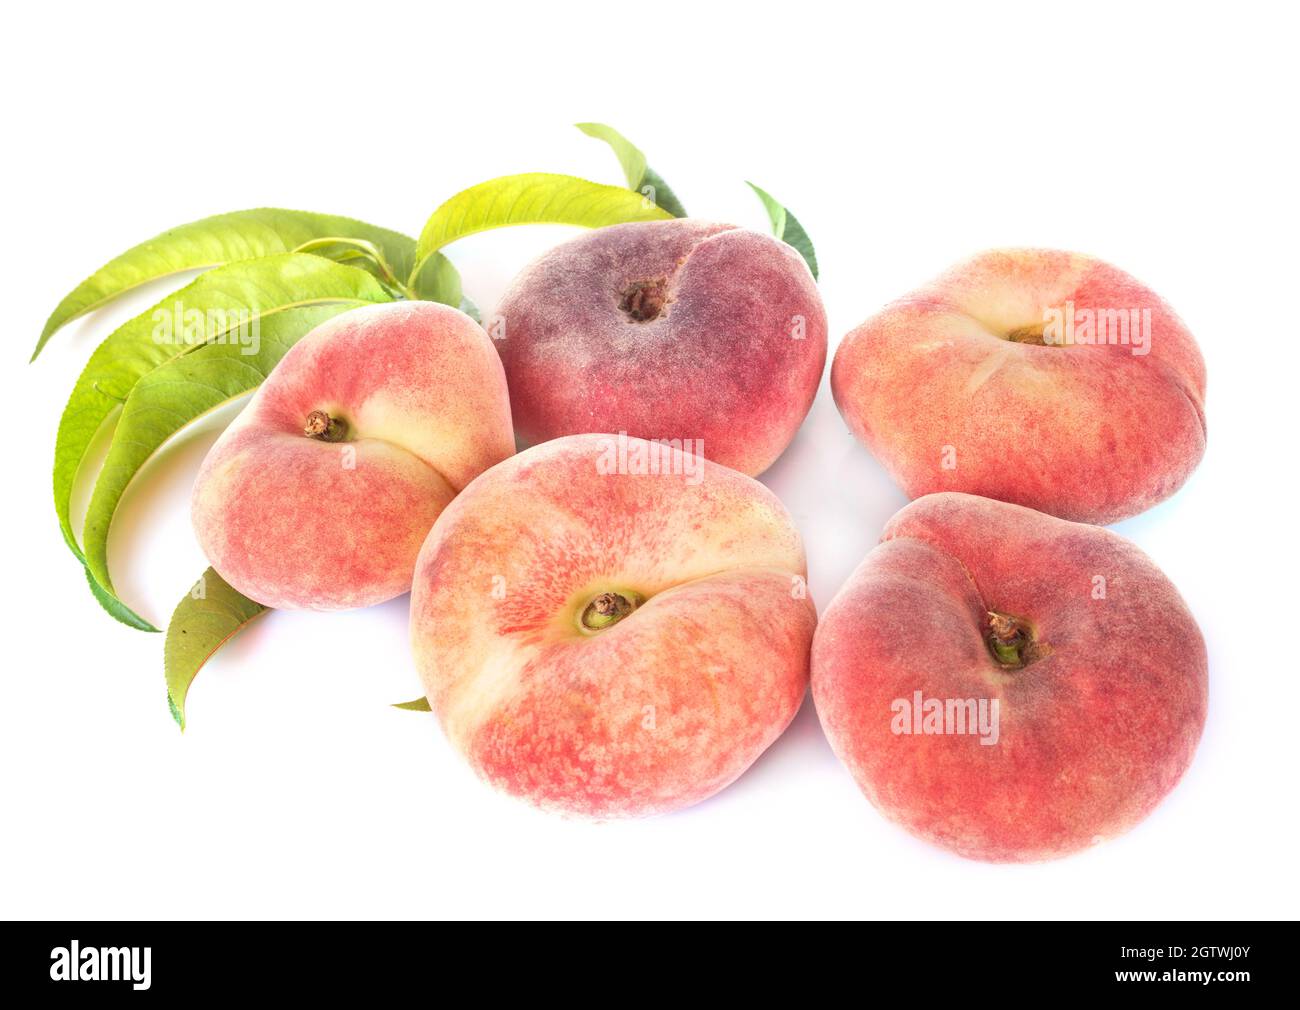 Close-up Of Apples On White Background Stock Photo